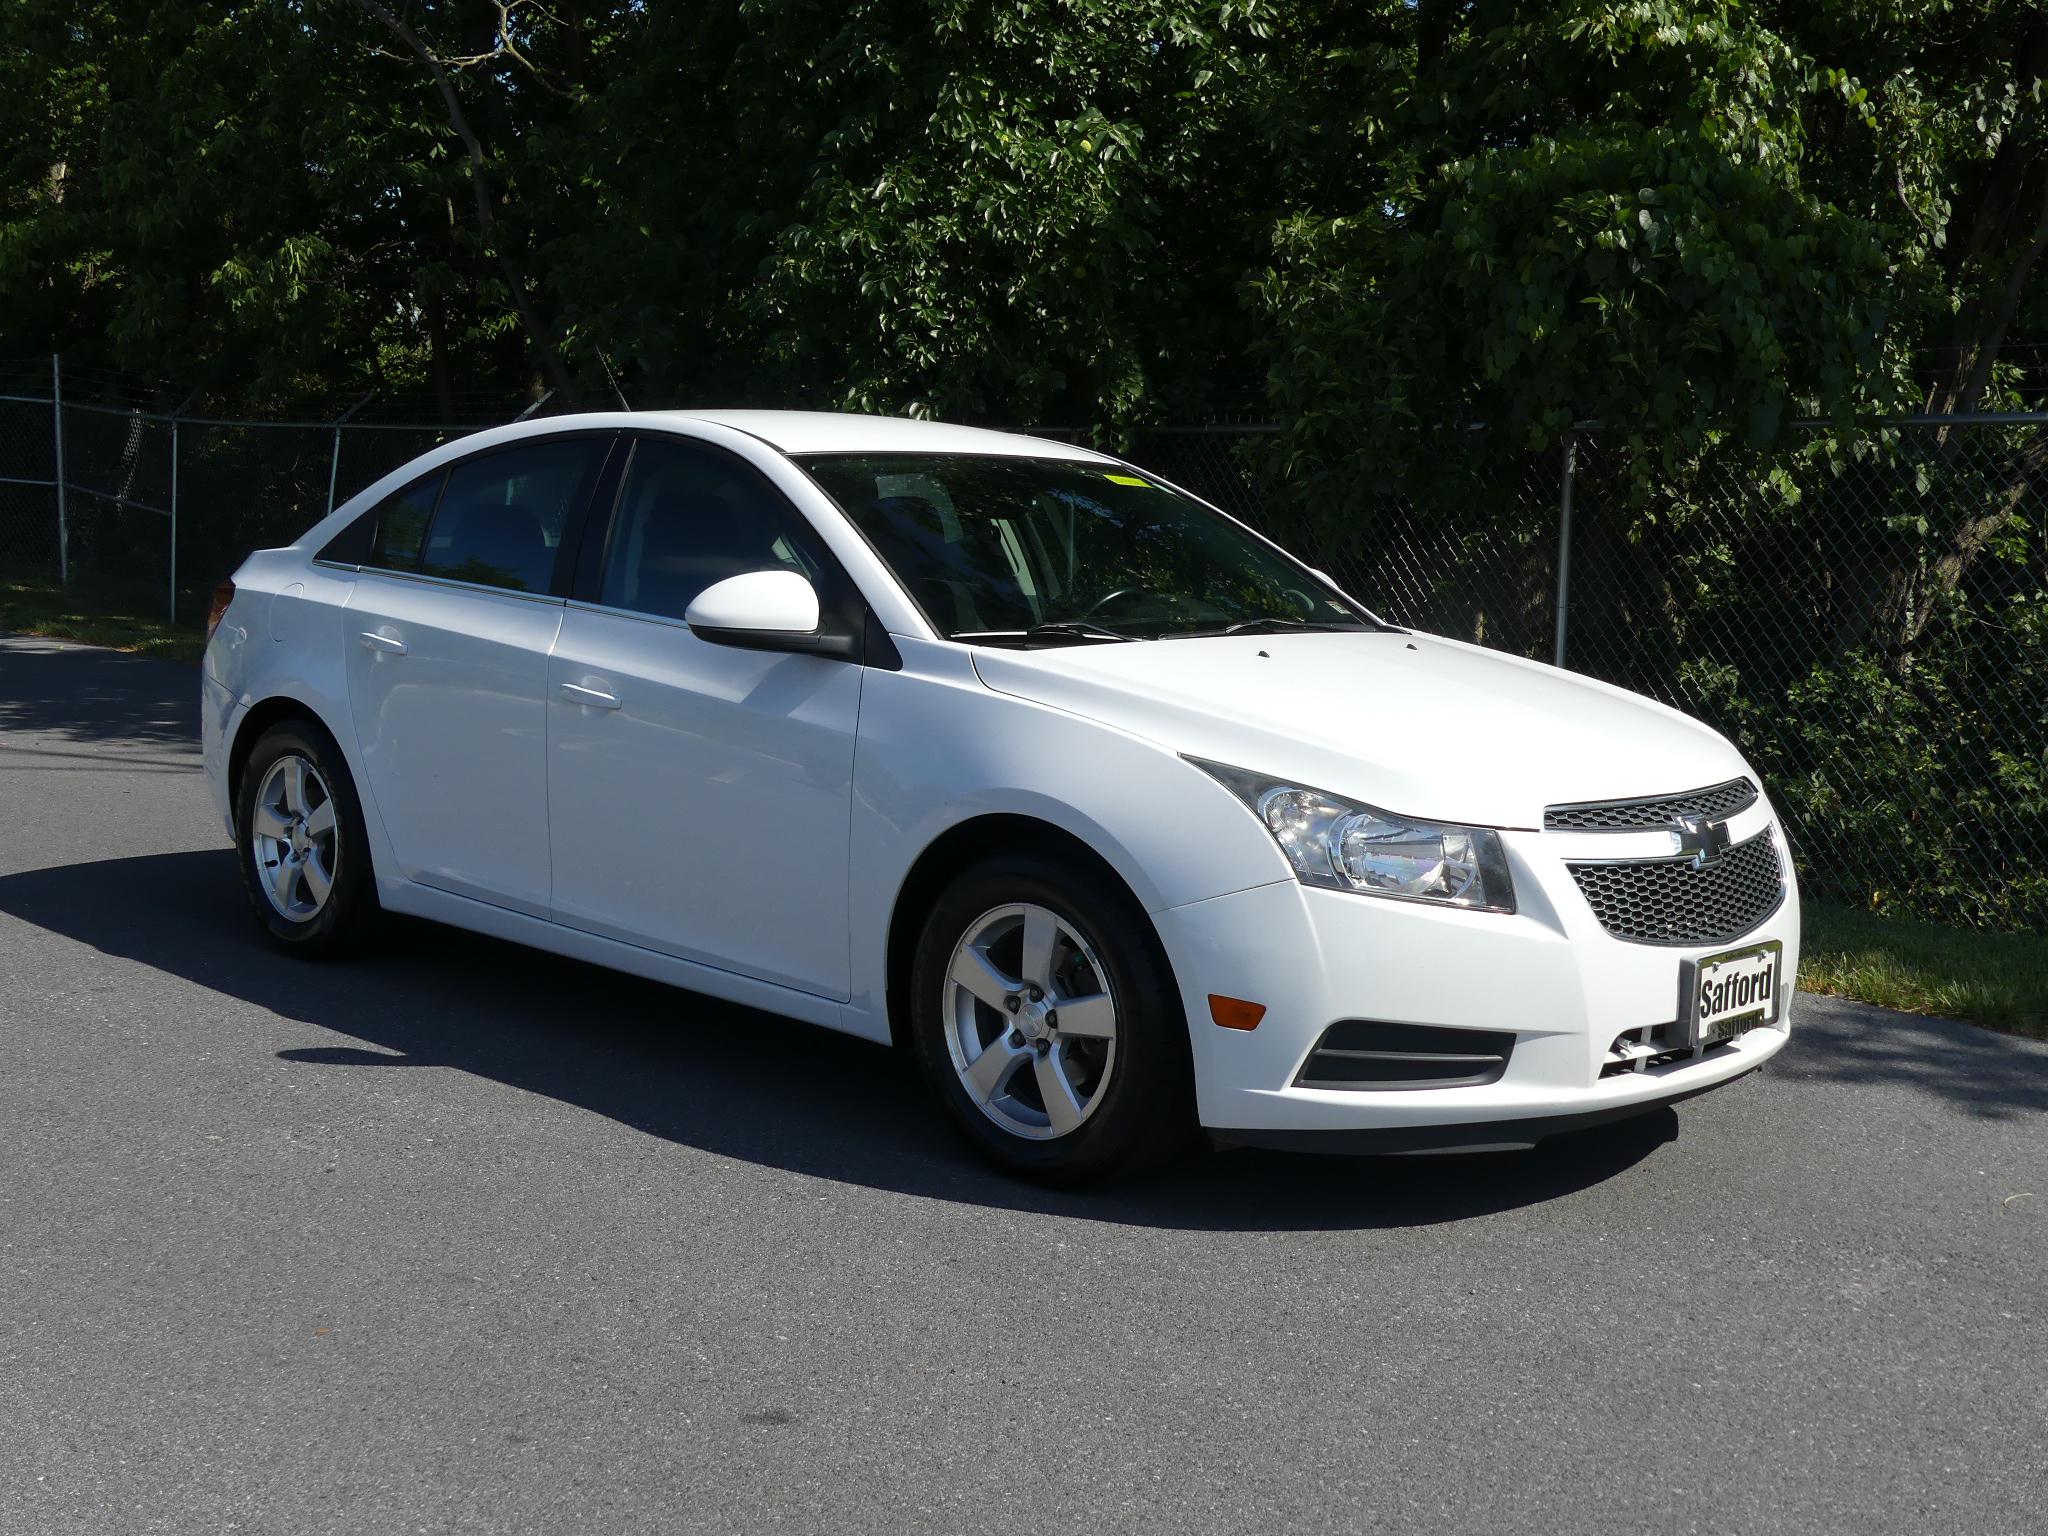 PreOwned 2013 Chevrolet Cruze 4dr Sdn Auto 1LT Front Wheel Drive 4dr Car